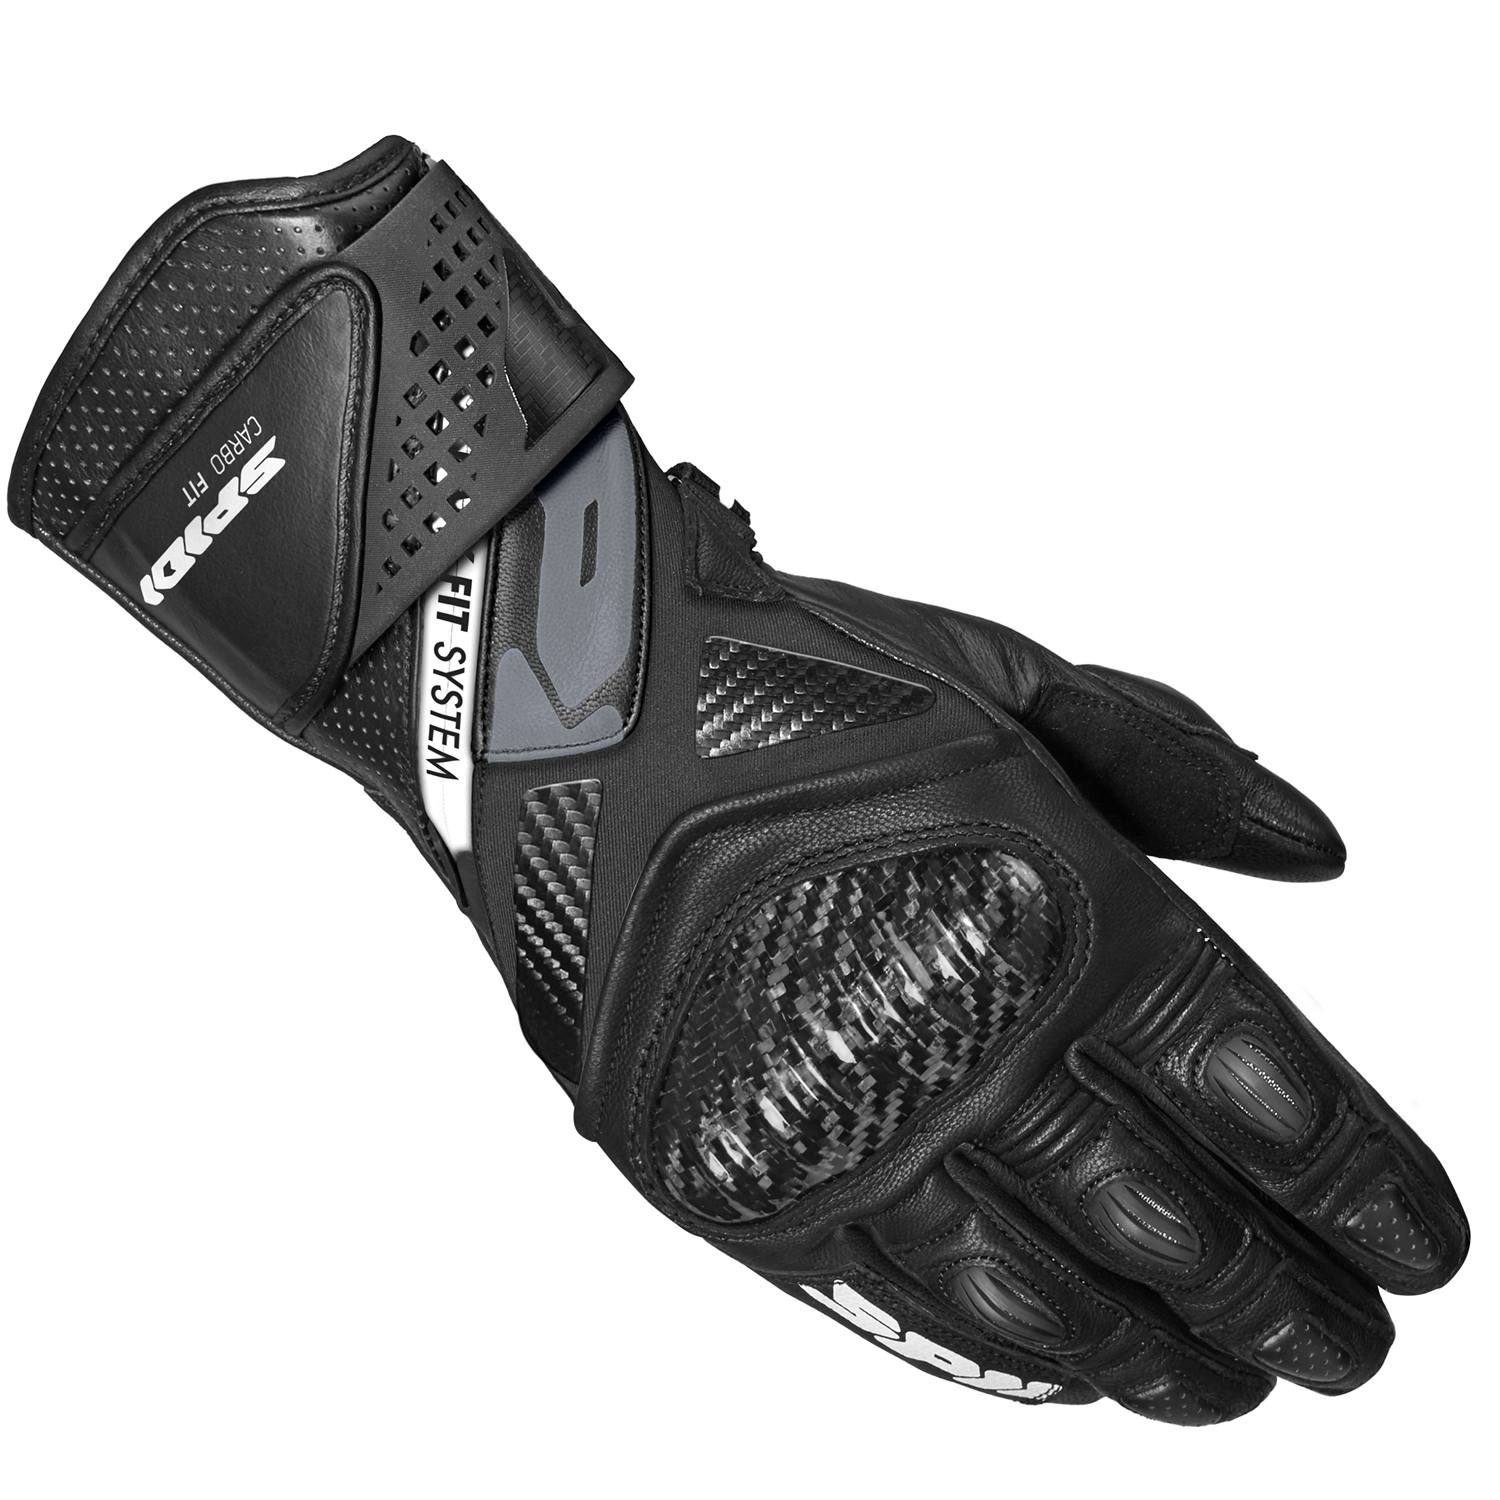 Image of Spidi Carbo Fit Gloves Black Size L ID 8030161481495